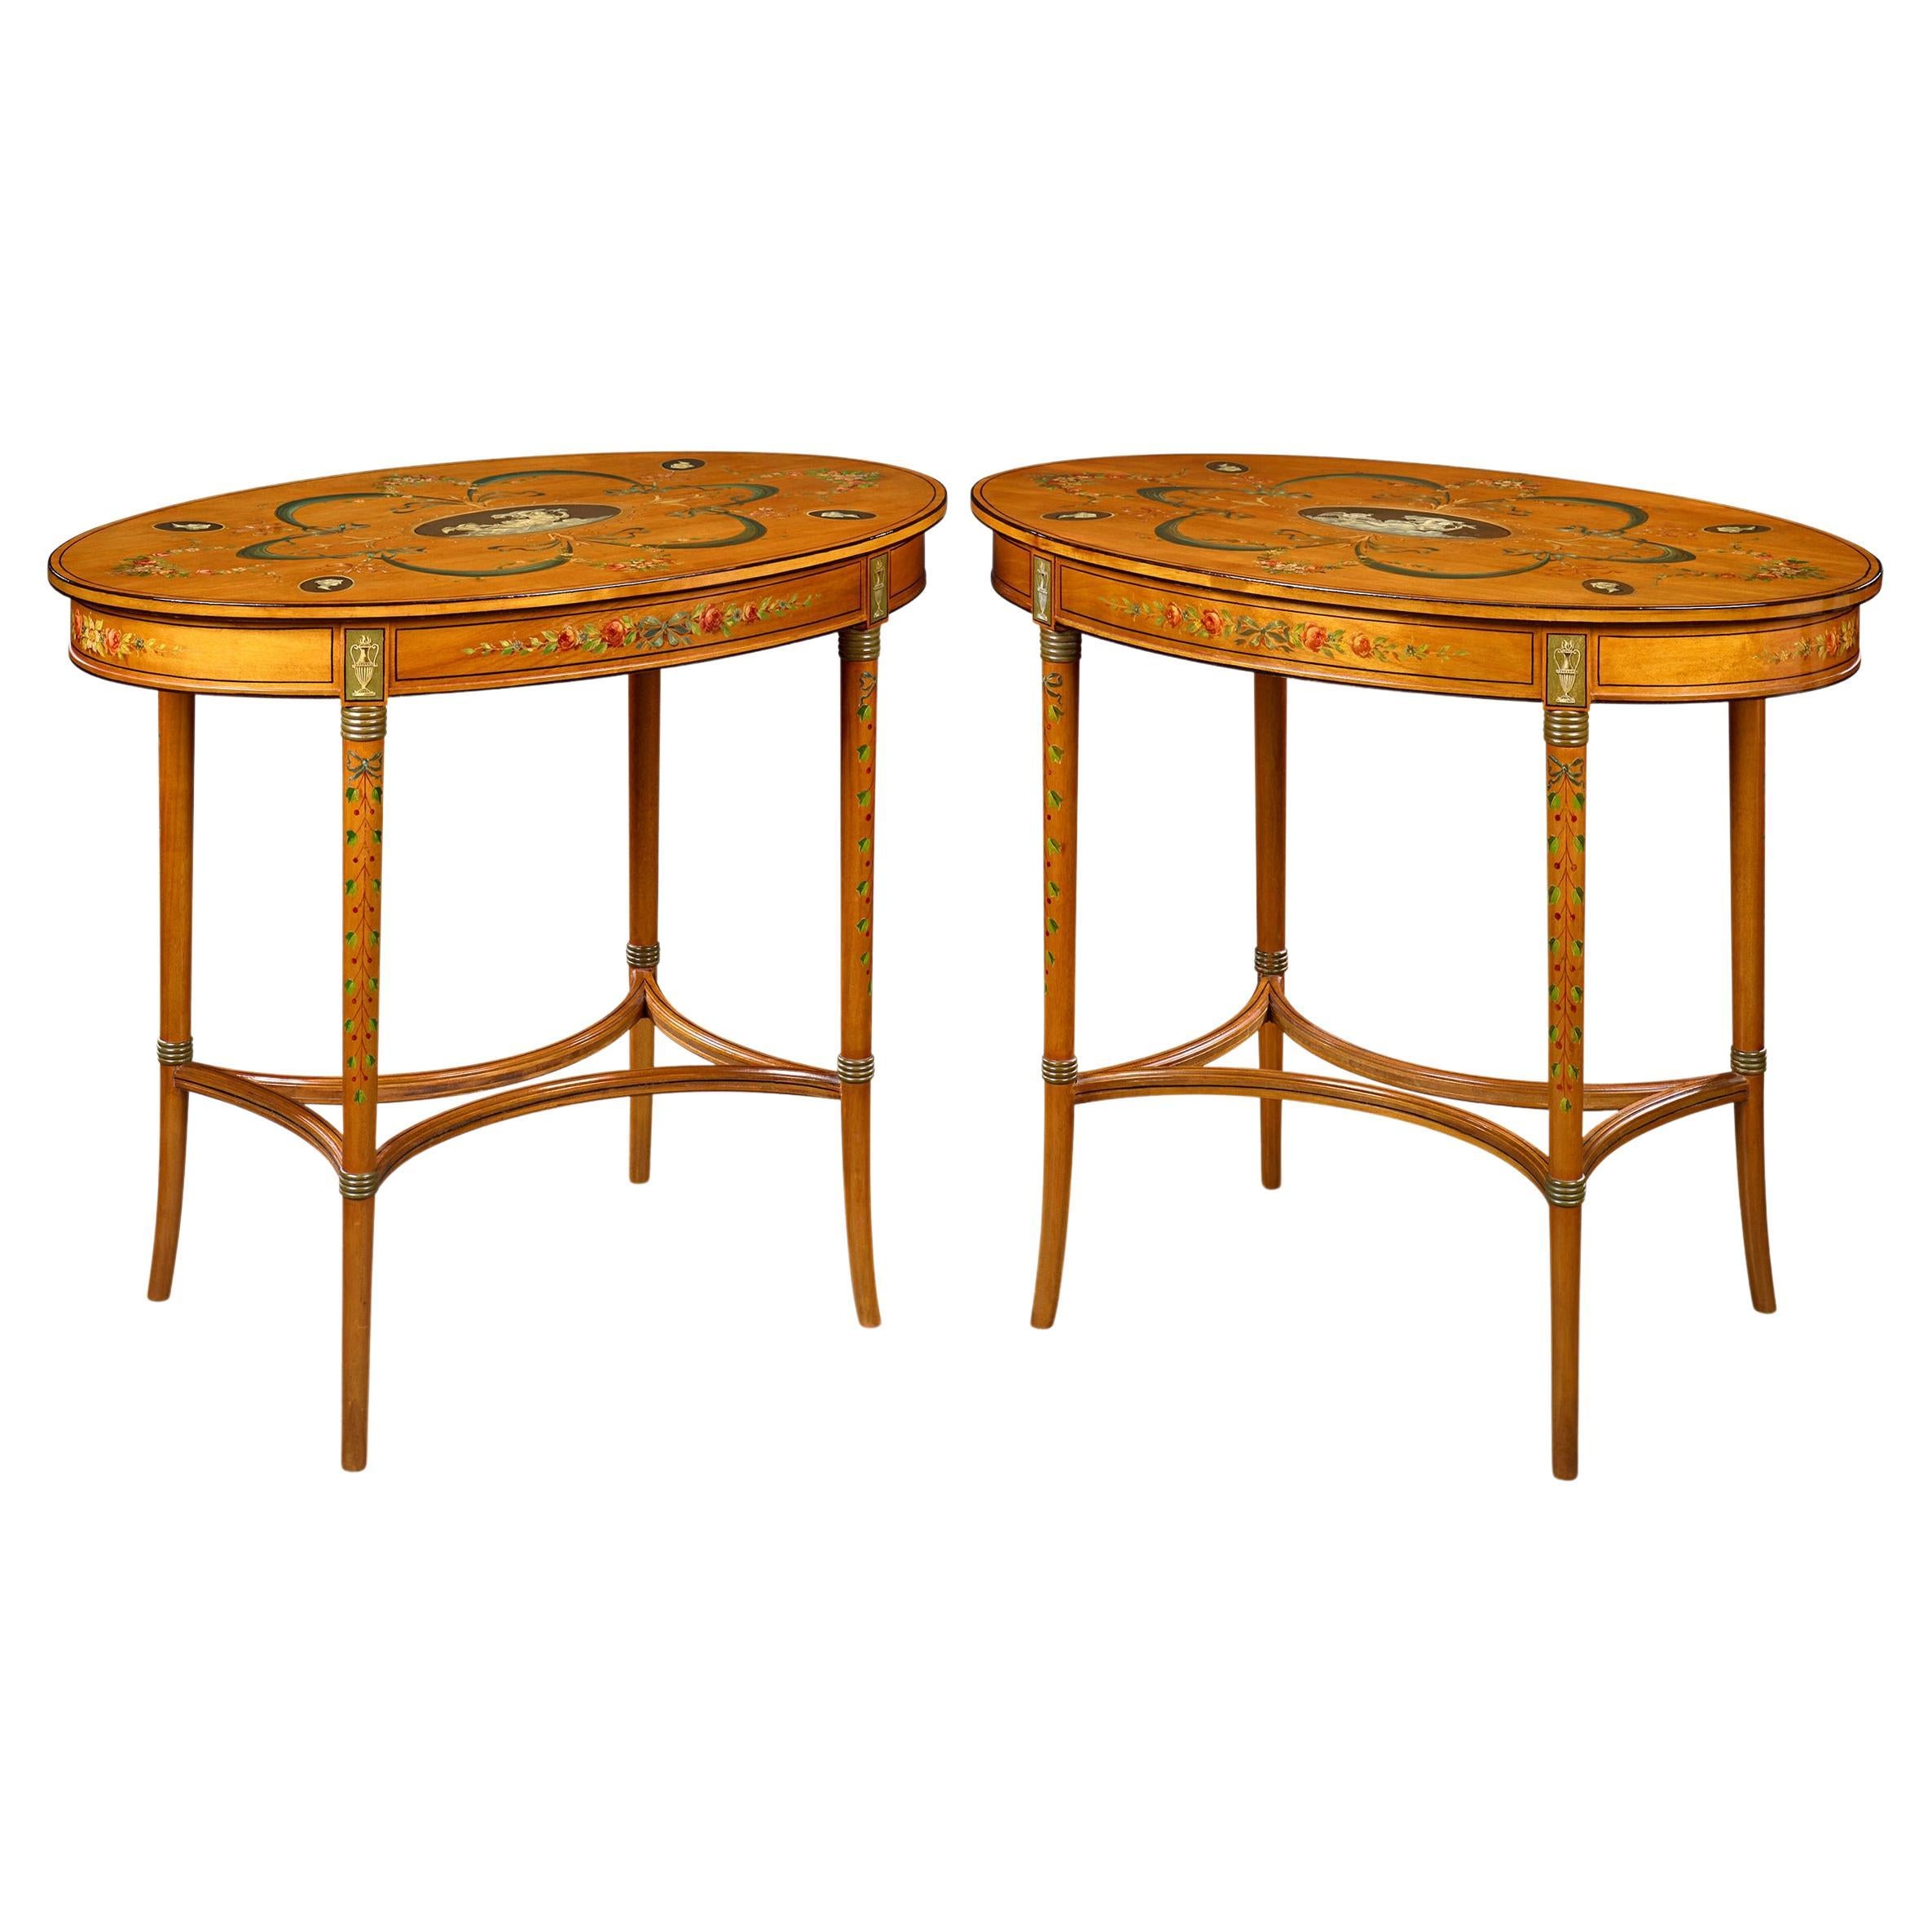 English Satinwood Parlor Tables For Sale